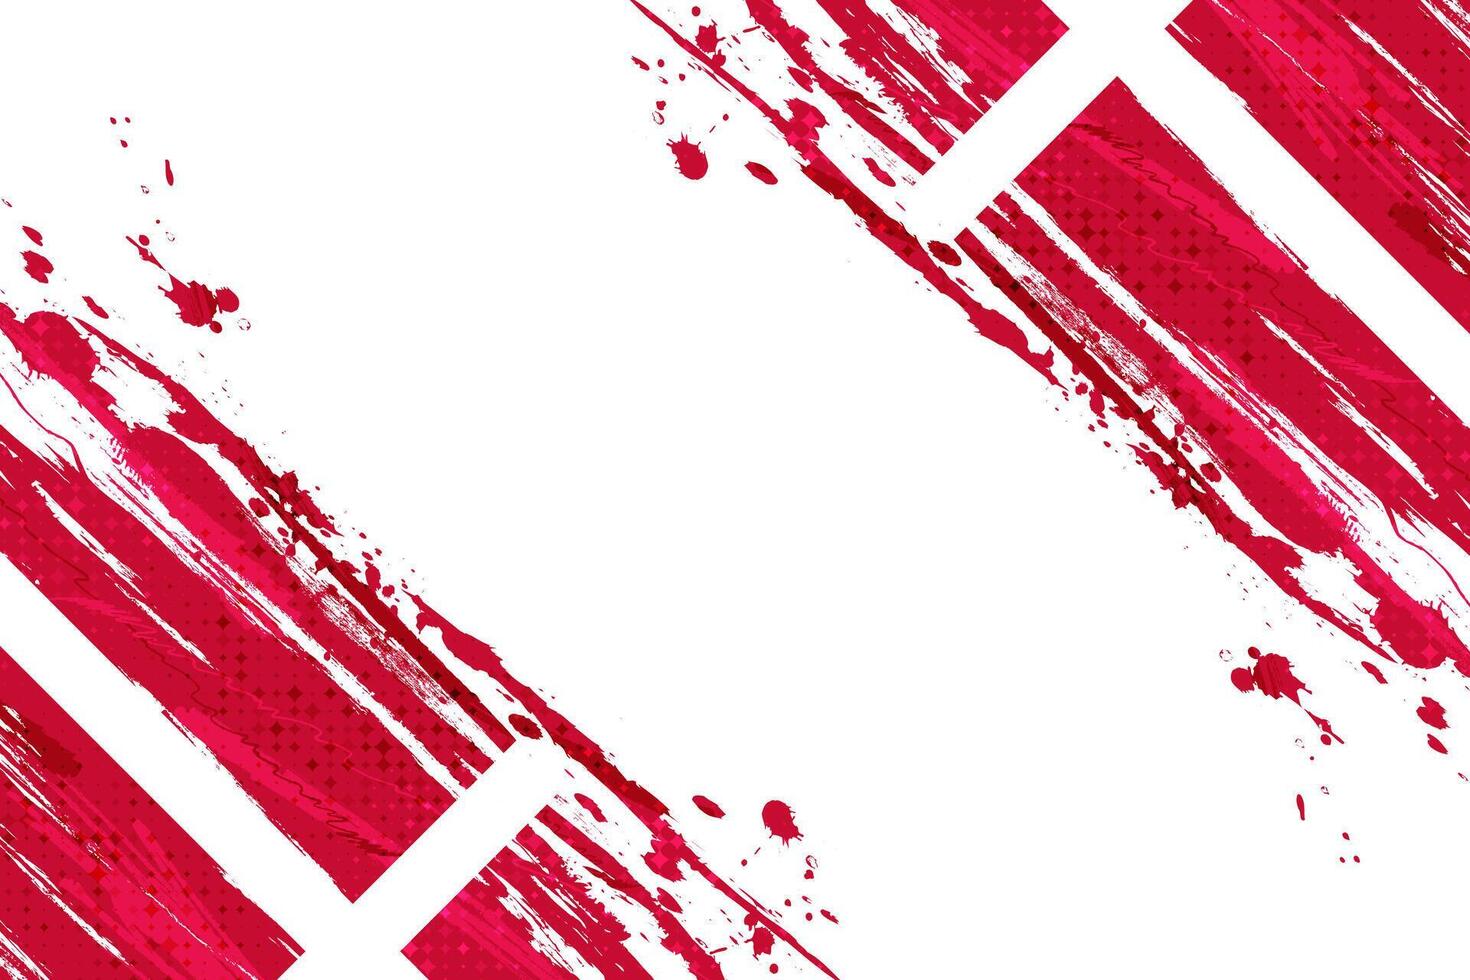 National Flag of Denmark with Brush Paint Style and Halftone Effect. Danish Flag Background with Grunge Concept vector